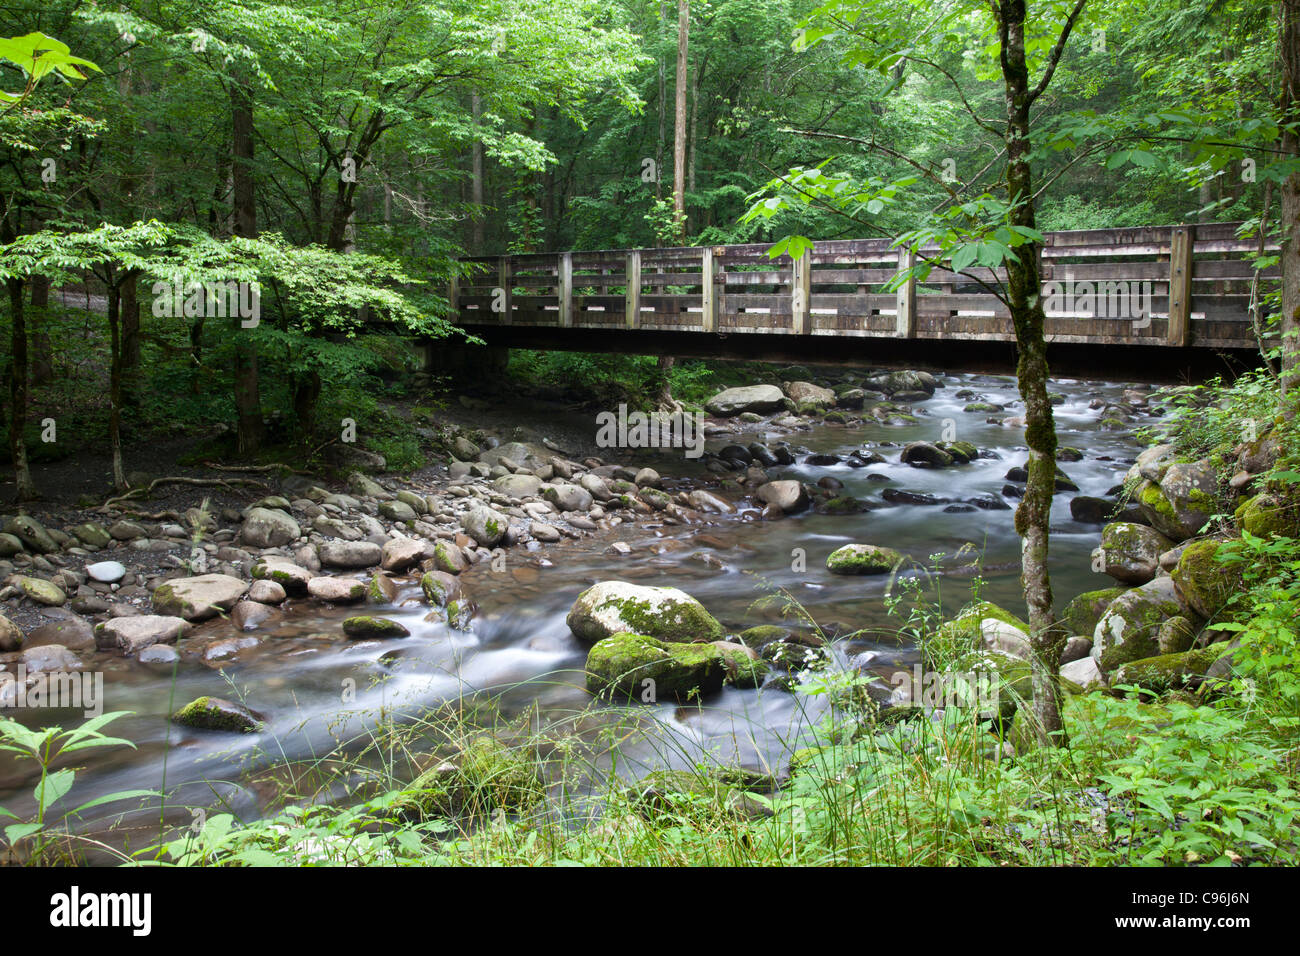 Bridge over the Middle Prong of the Little Pigeon River in the Great Smoky Mountains National Park, on the Tennessee side of the park. Stock Photo